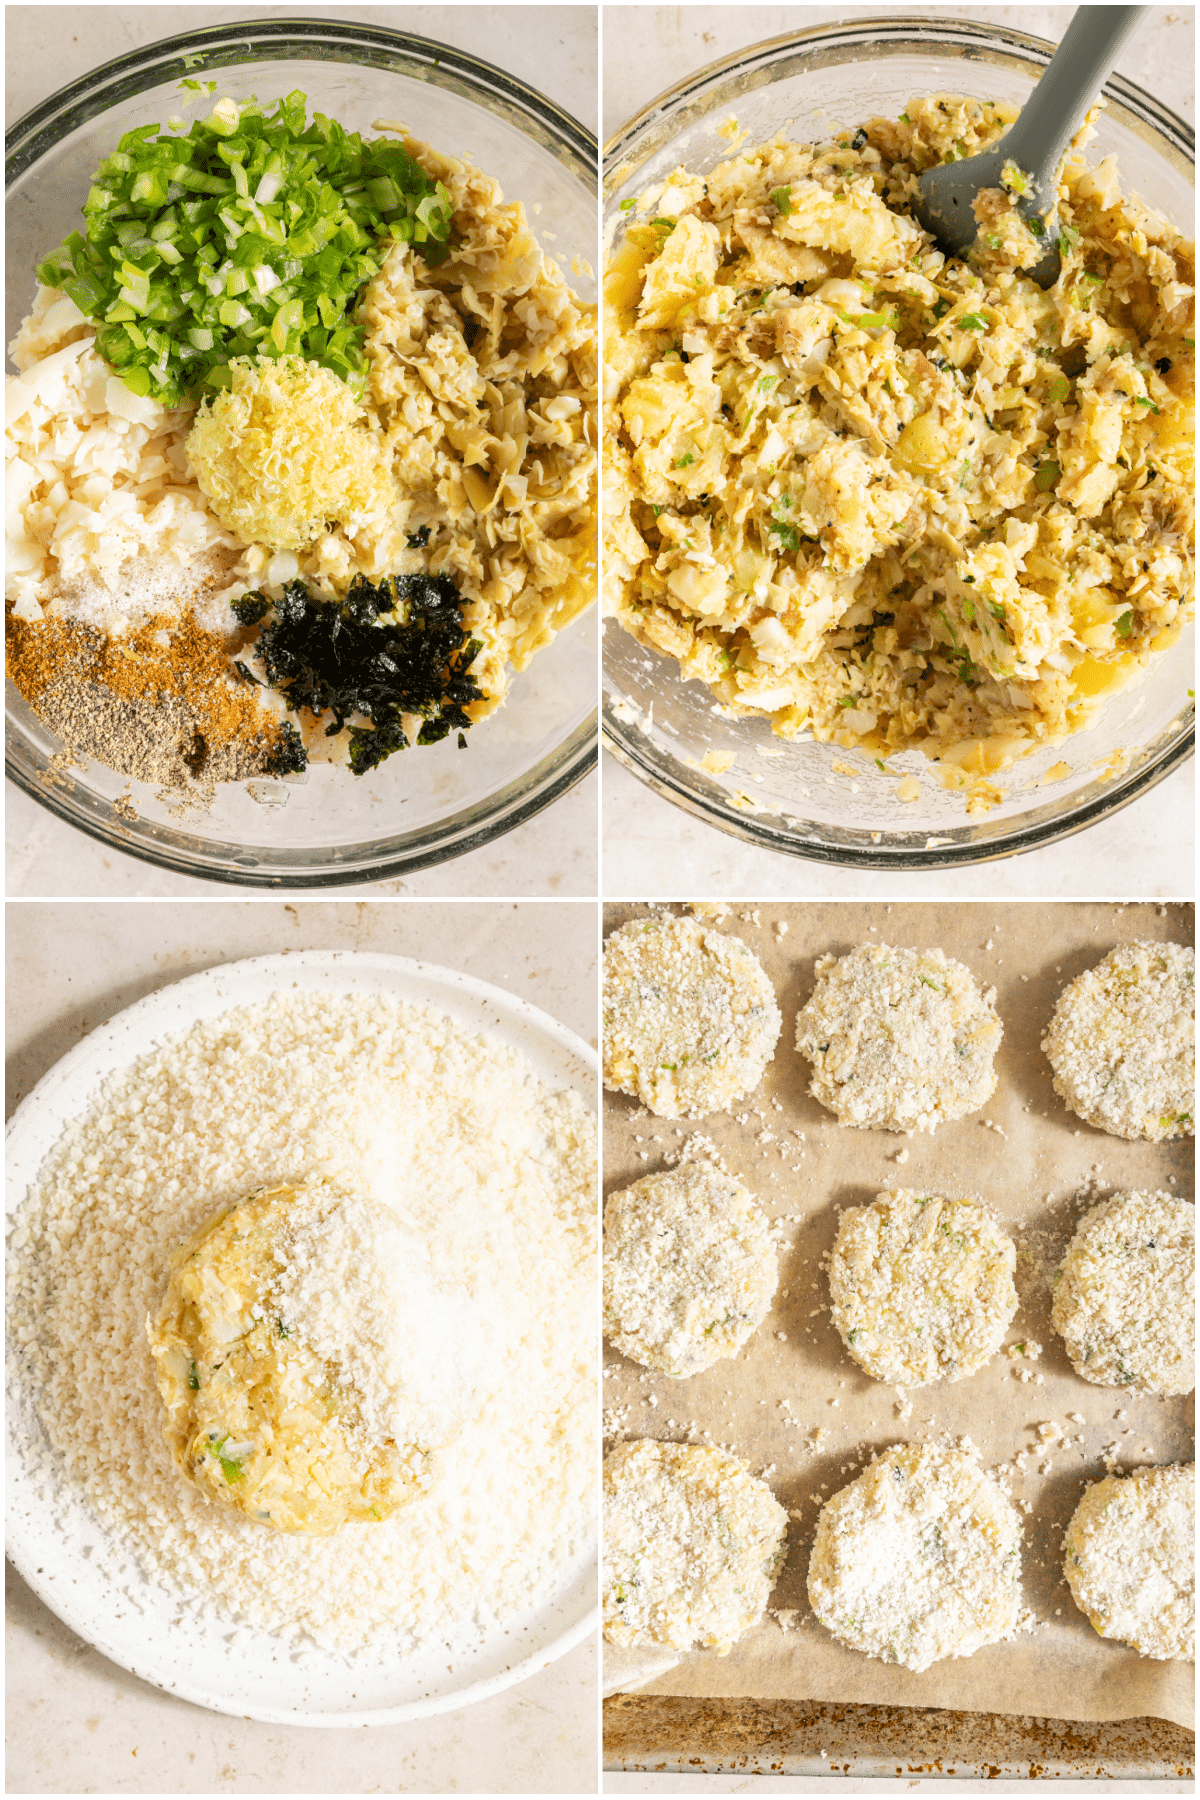 A four image collage showing how to make vegan crab cakes: a glass bowl of unmixed ingredients (palm heart, artichoke heart, nori, onion, mashed potato, spices), the bowl of ingredients mixed, a crab cake in a plate of panko crumbs, crab cakes on a baking sheet.